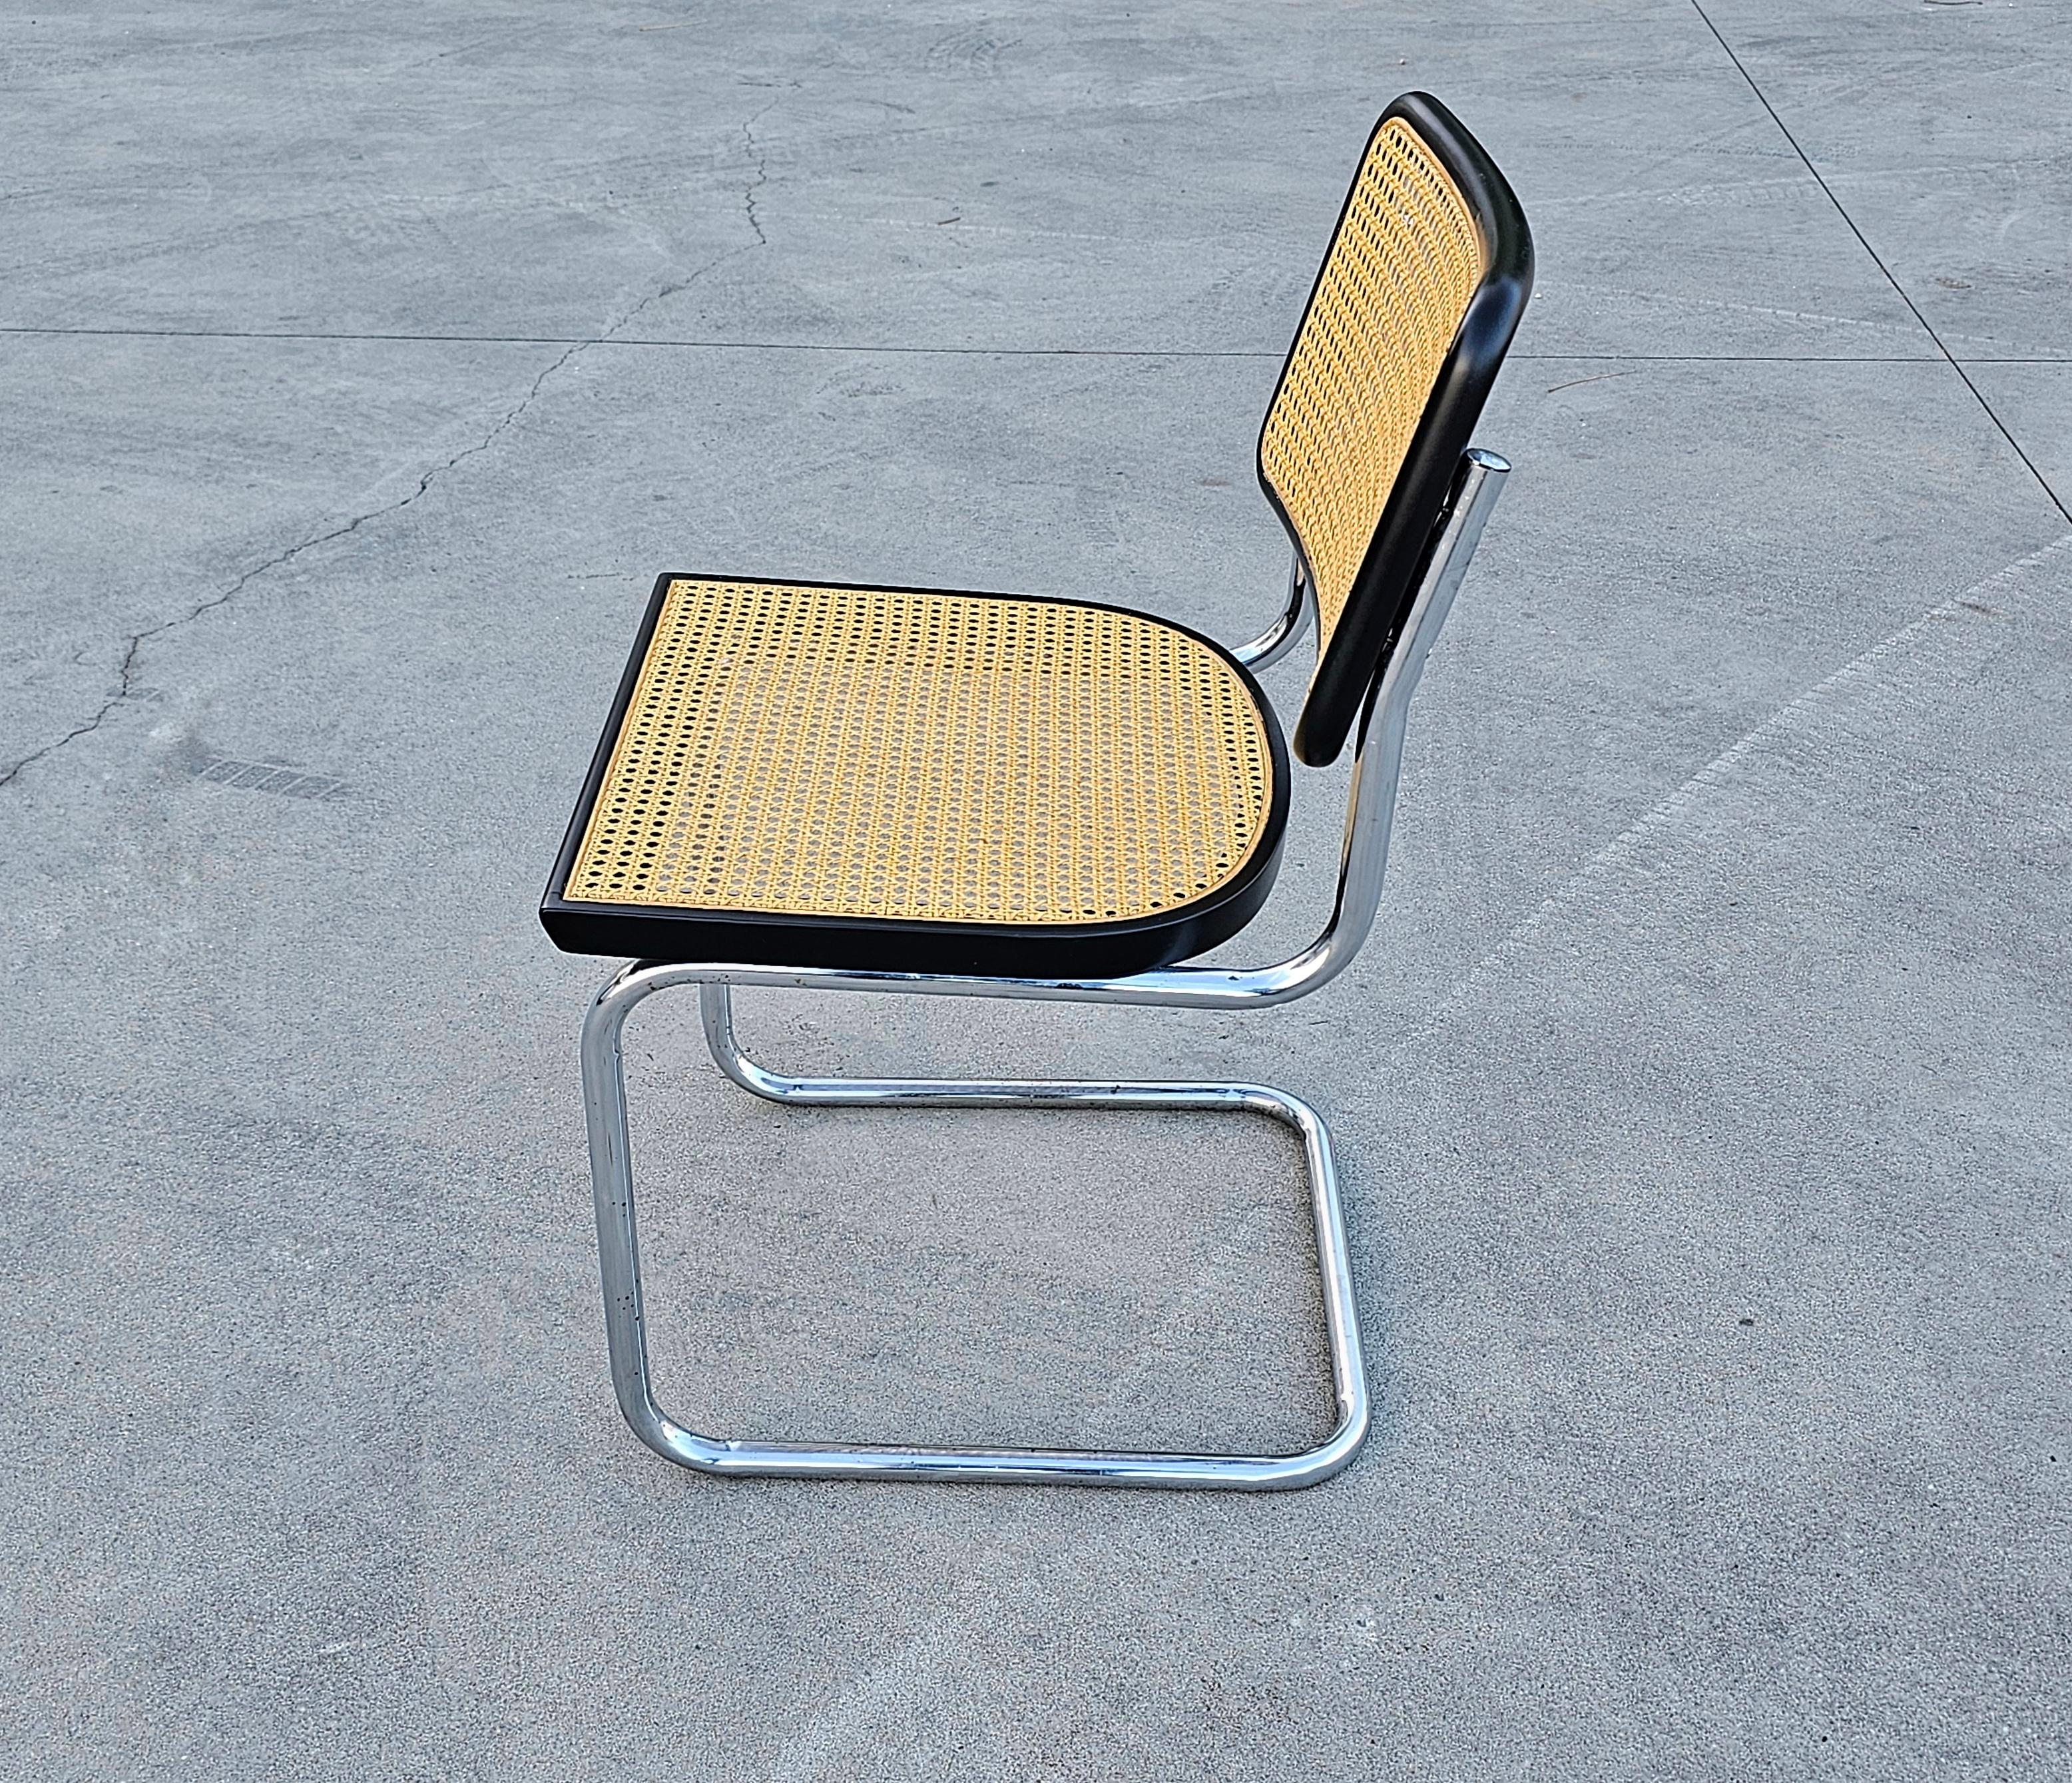 Cane Cesca Chairs with Black Frames by Marcel Breuer attr. to Gavina, Italy 1960s For Sale